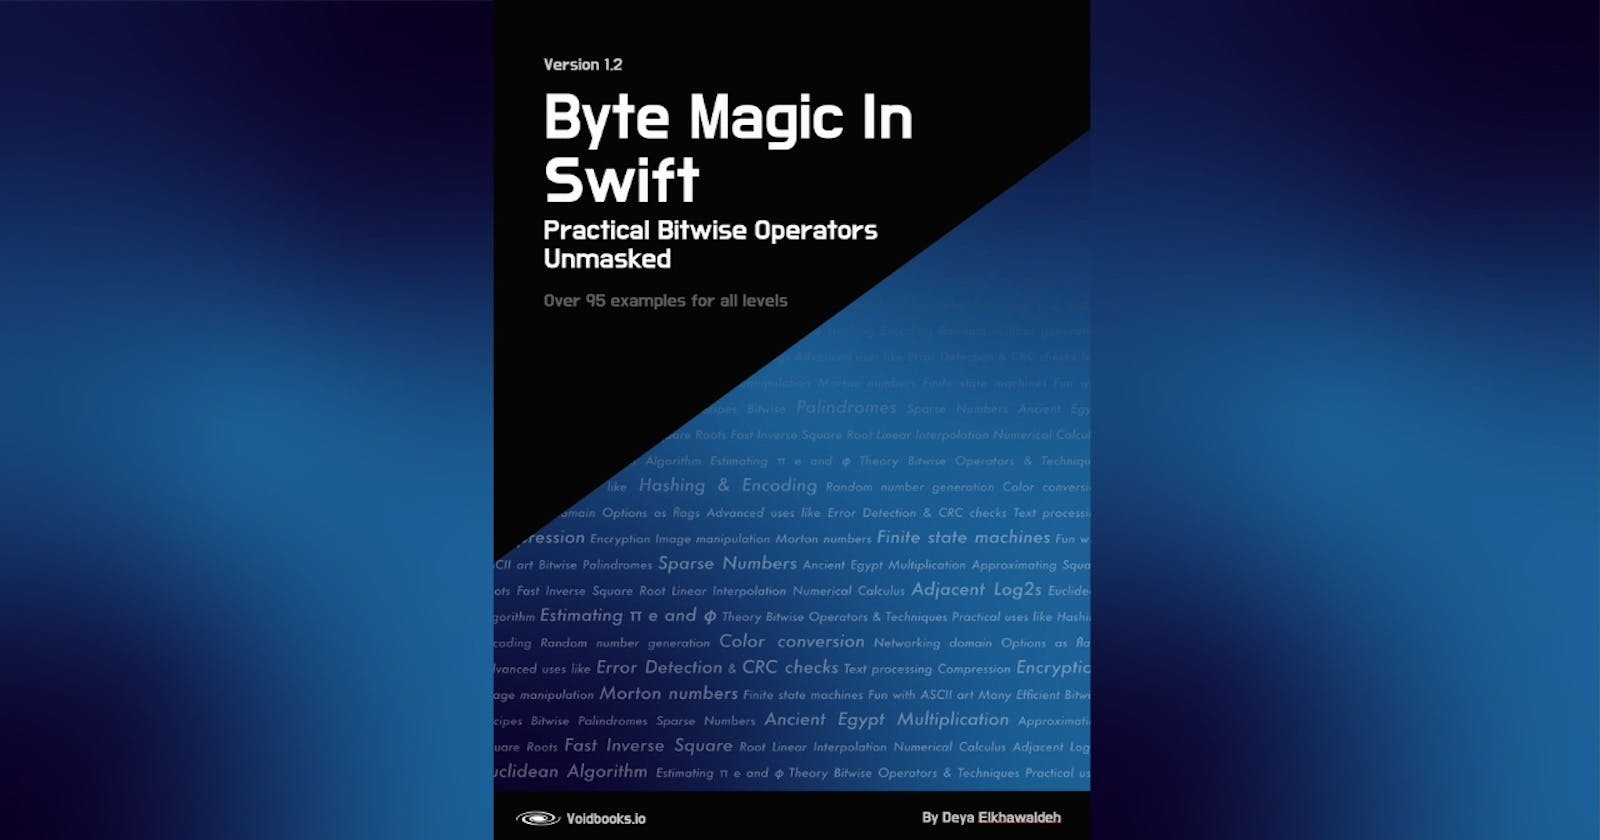 Our first publication: Byte Magic In Swift